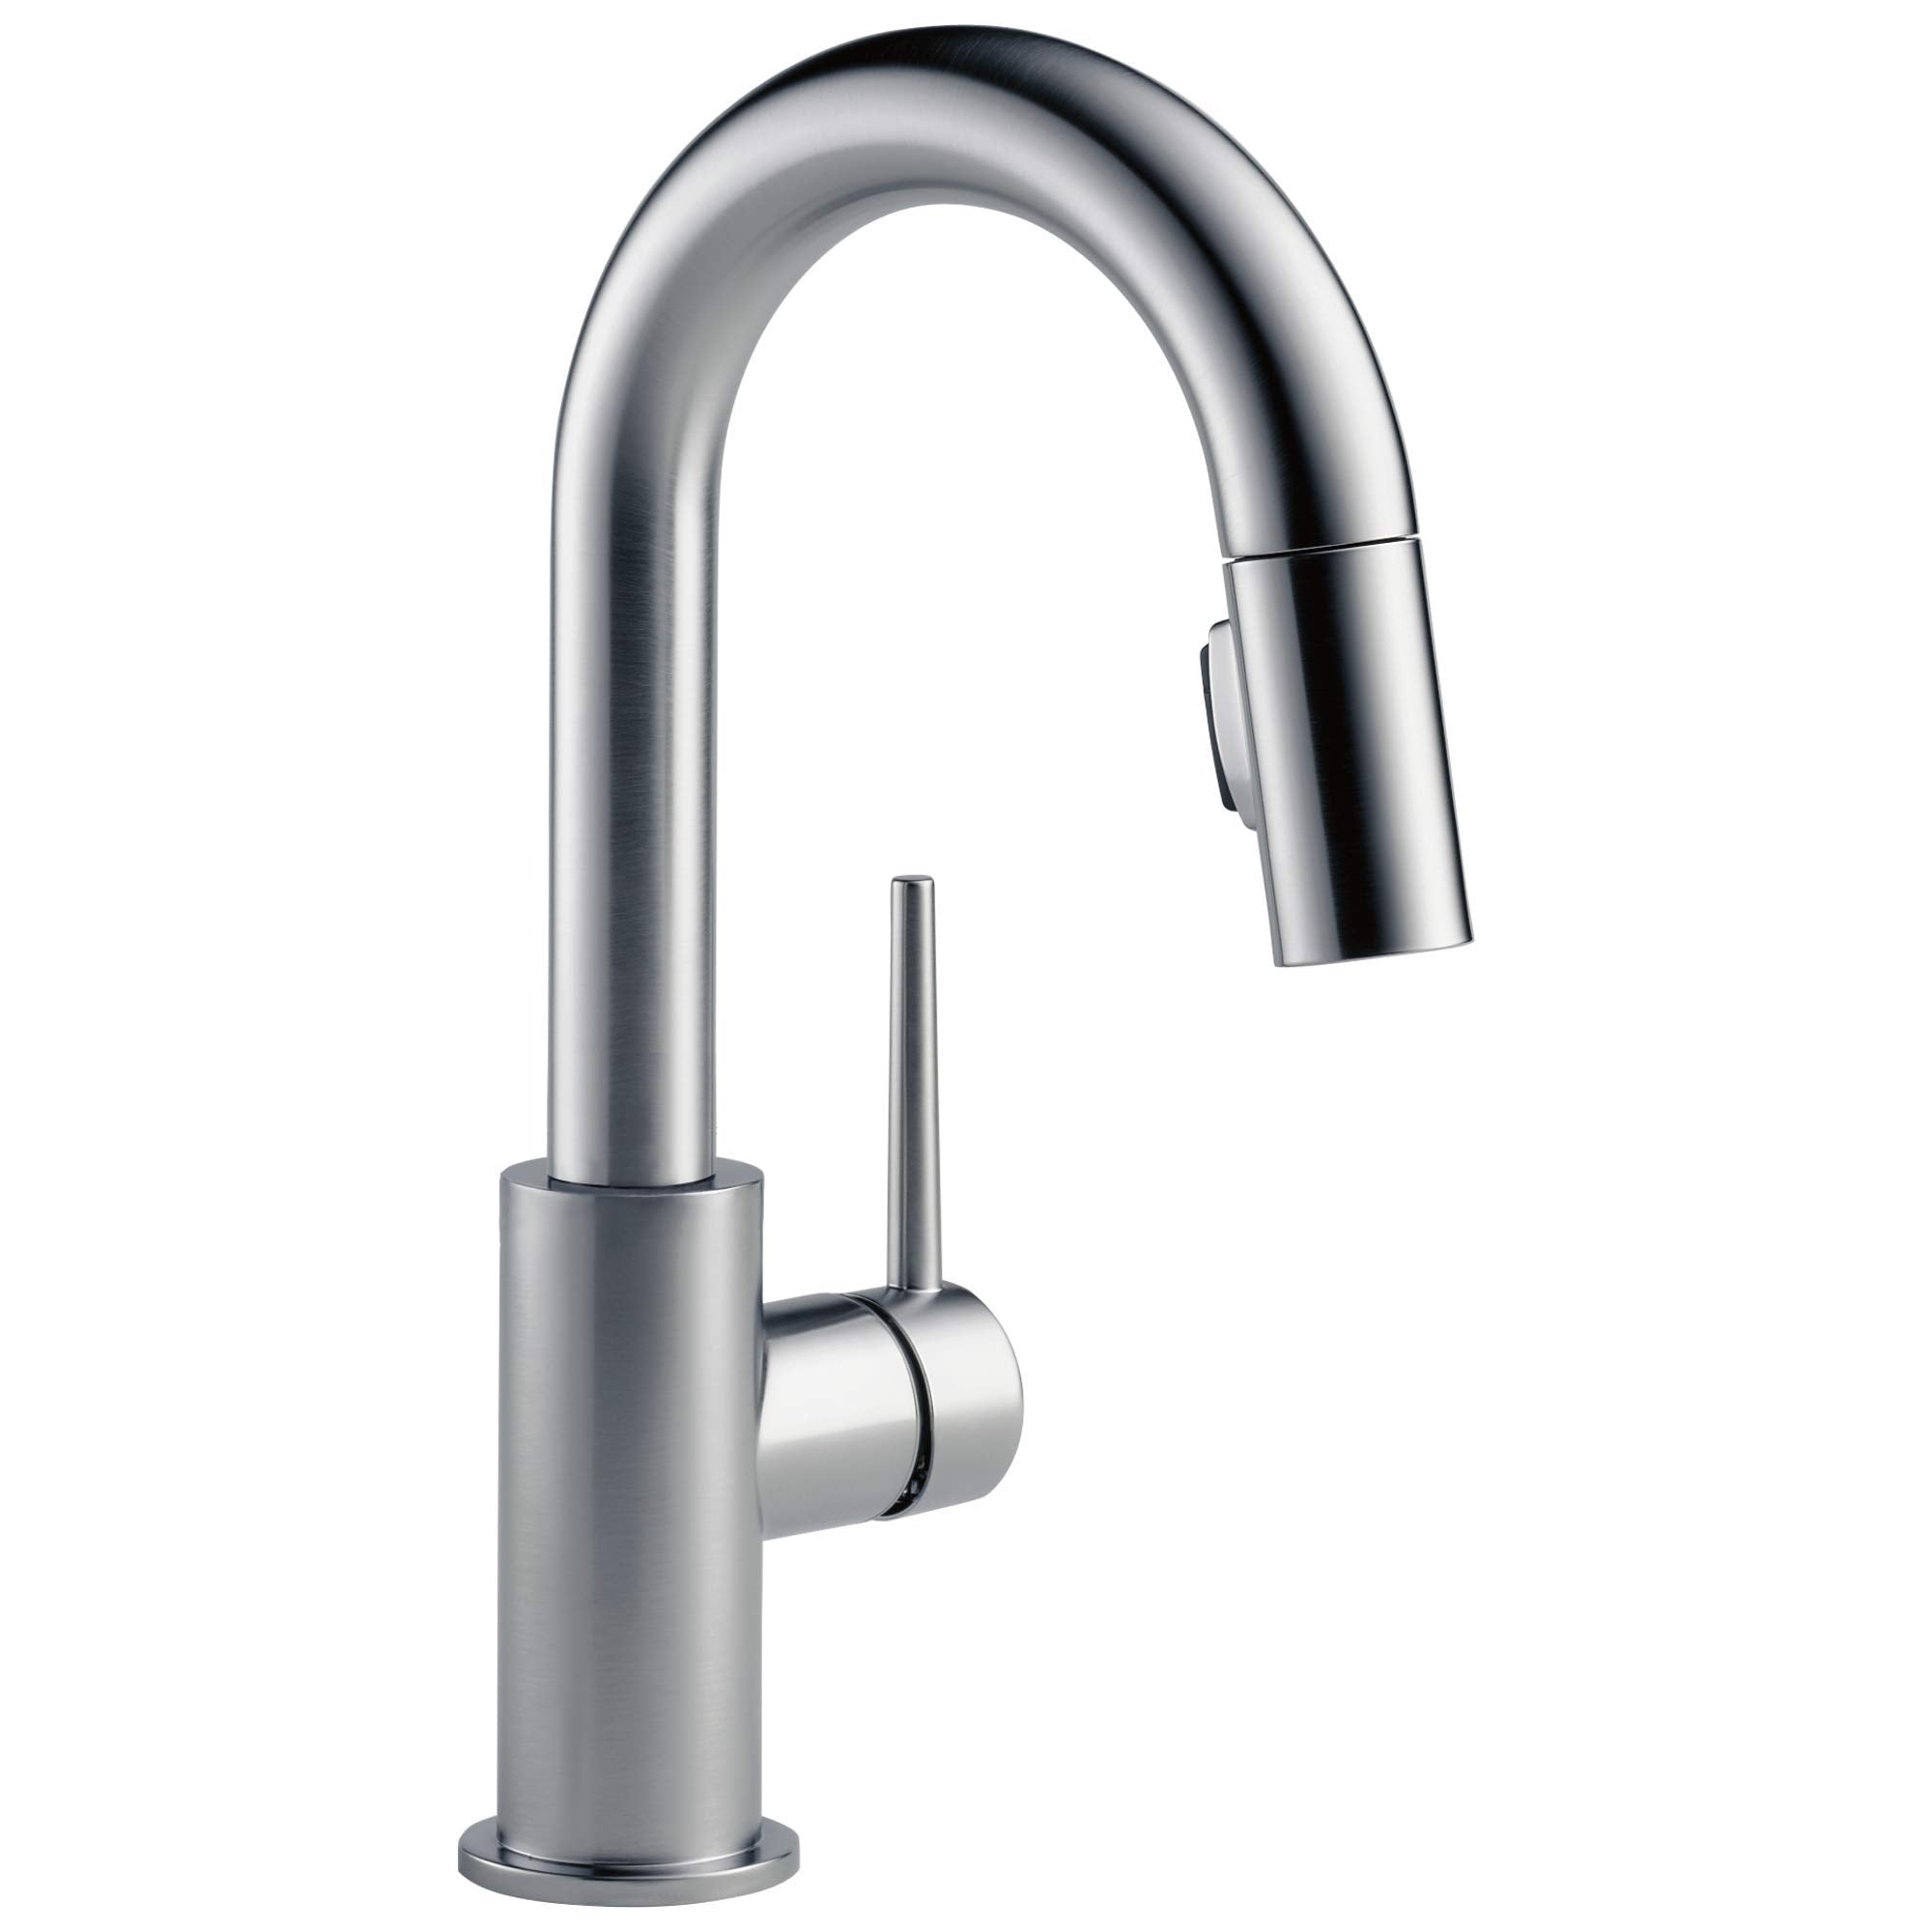 Delta Faucet Trinsic Bar Faucet Brushed Nickel, Single Hole, Pull Down Sprayer (7451740078318)